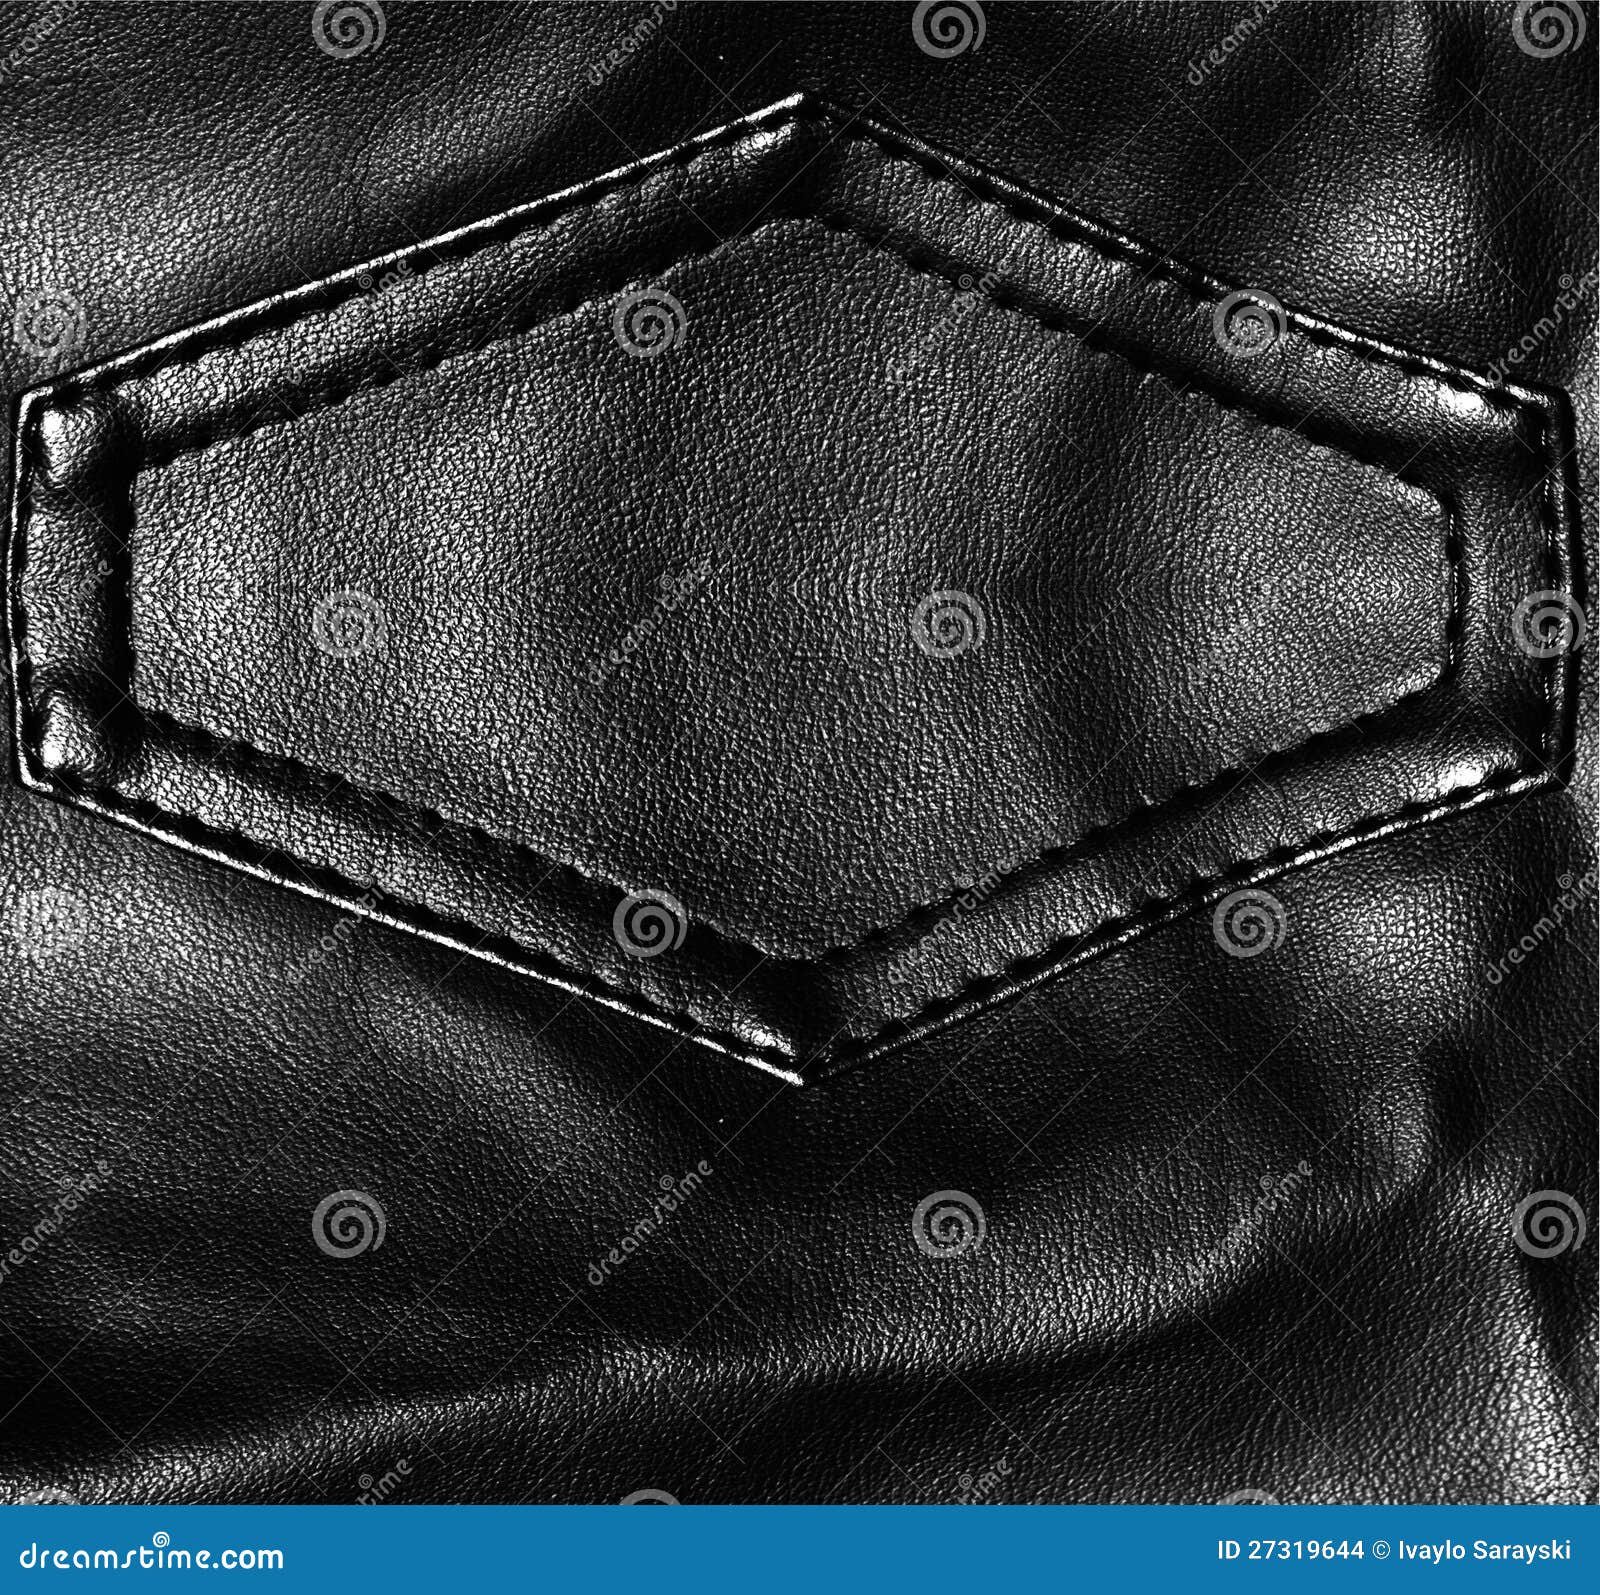 Black leather texture stock photo. Image of abstract - 27319644